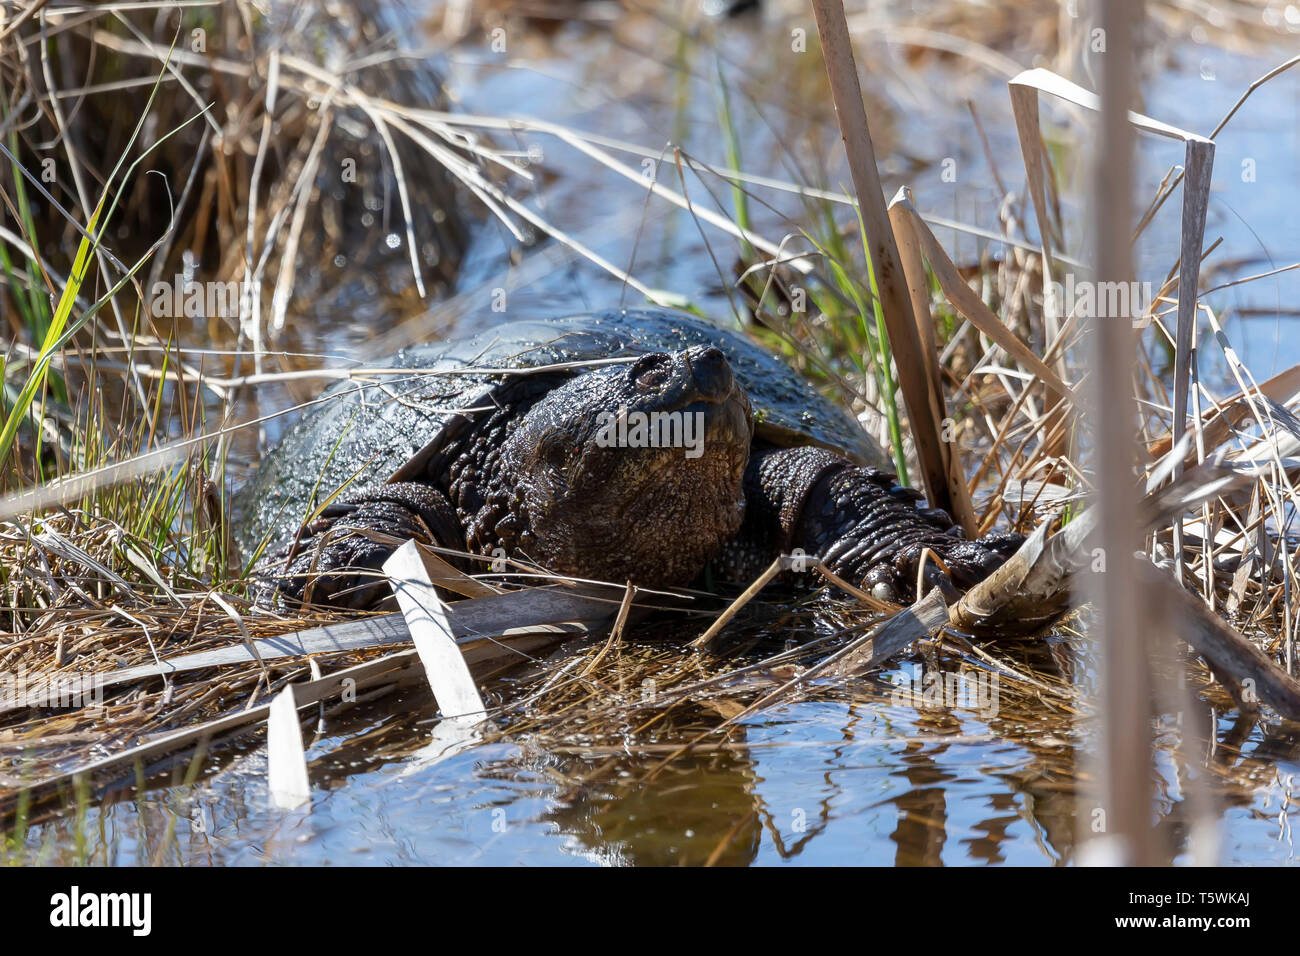 Old Common snapping turtle (Chelydra serpentina) in the conservation wildlife area in Wisconsin. Stock Photo